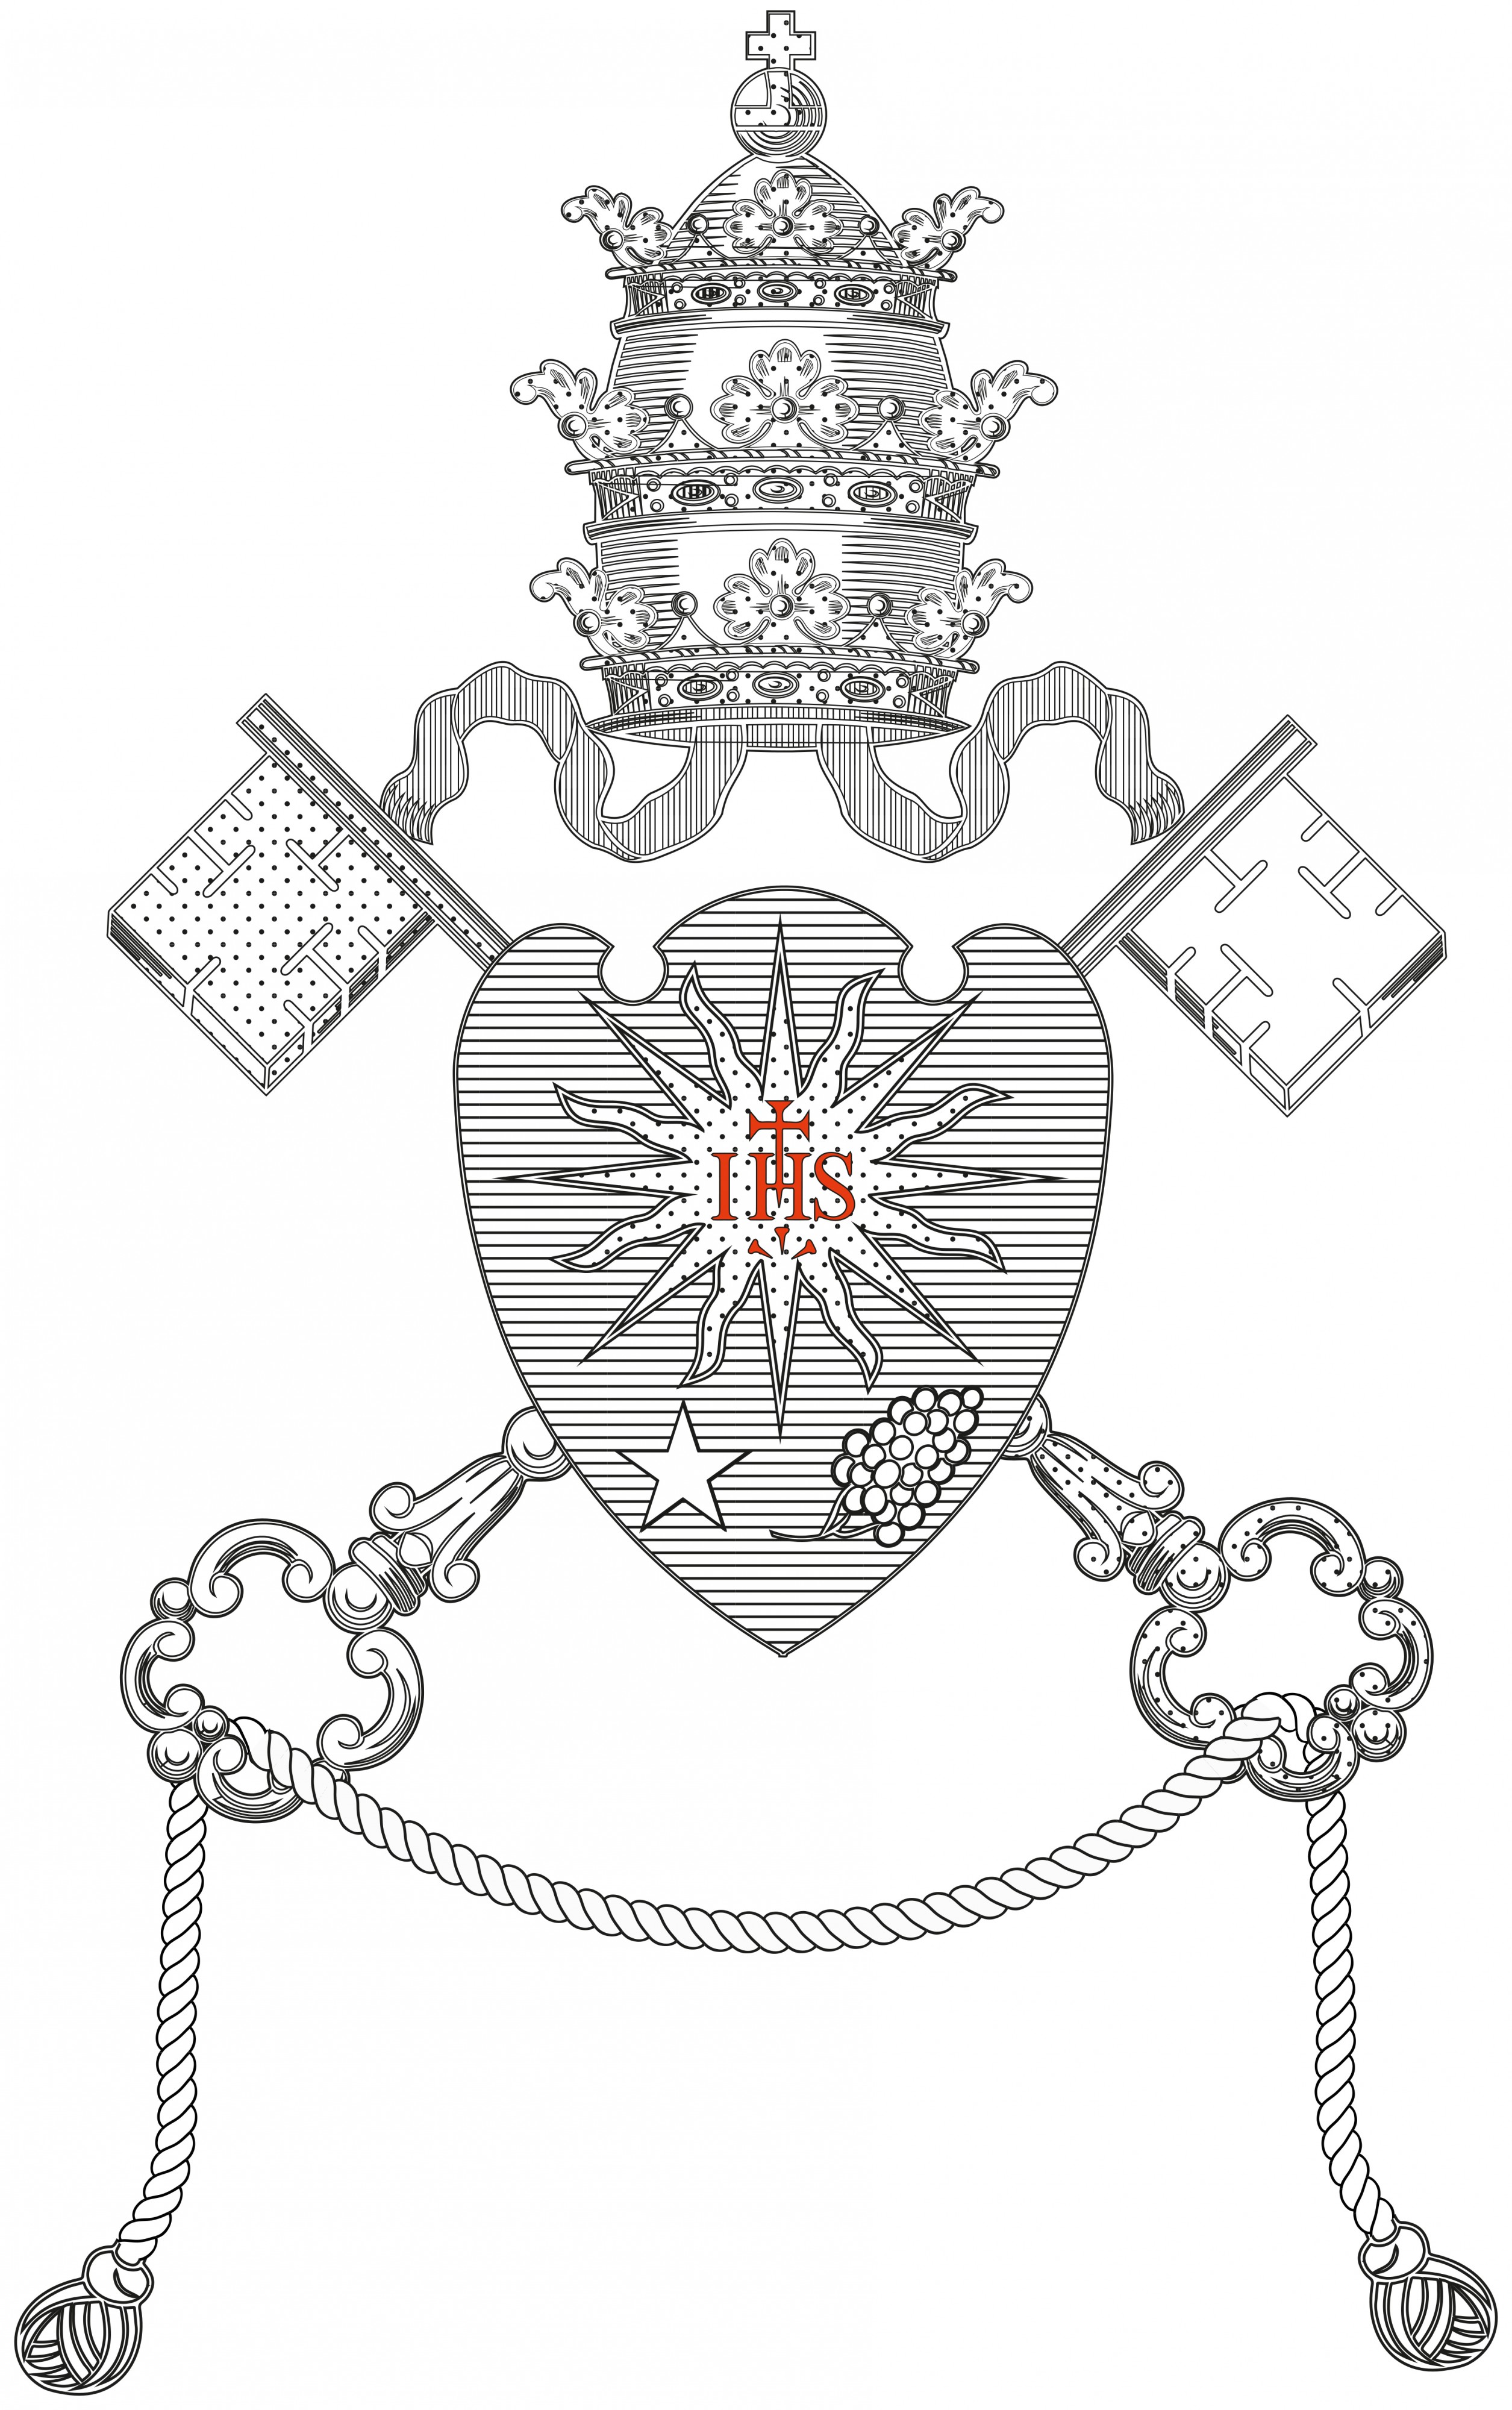 Arms of the Pope Francisco